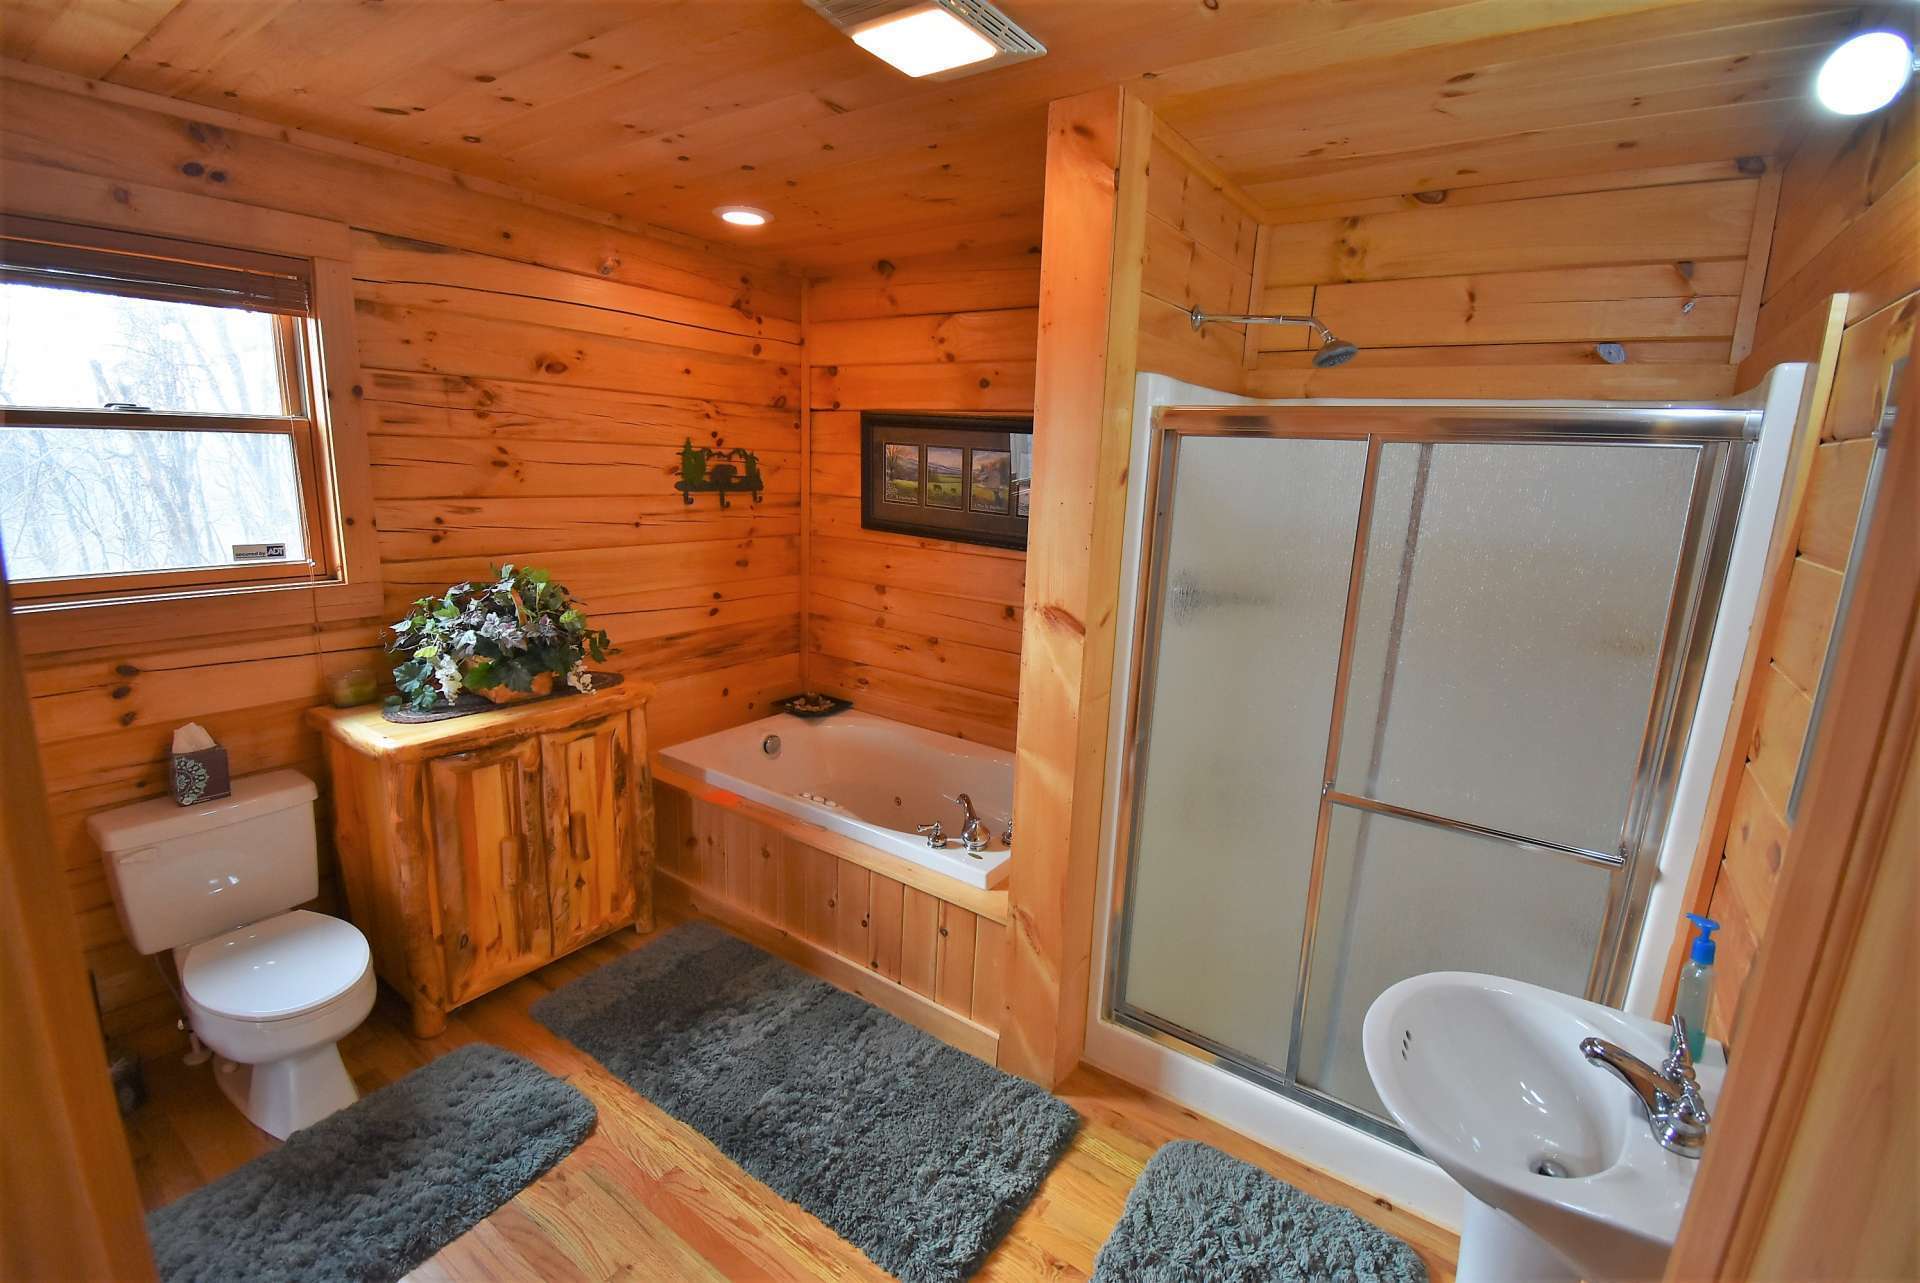 The master bath offers a jetted tub and separate shower.